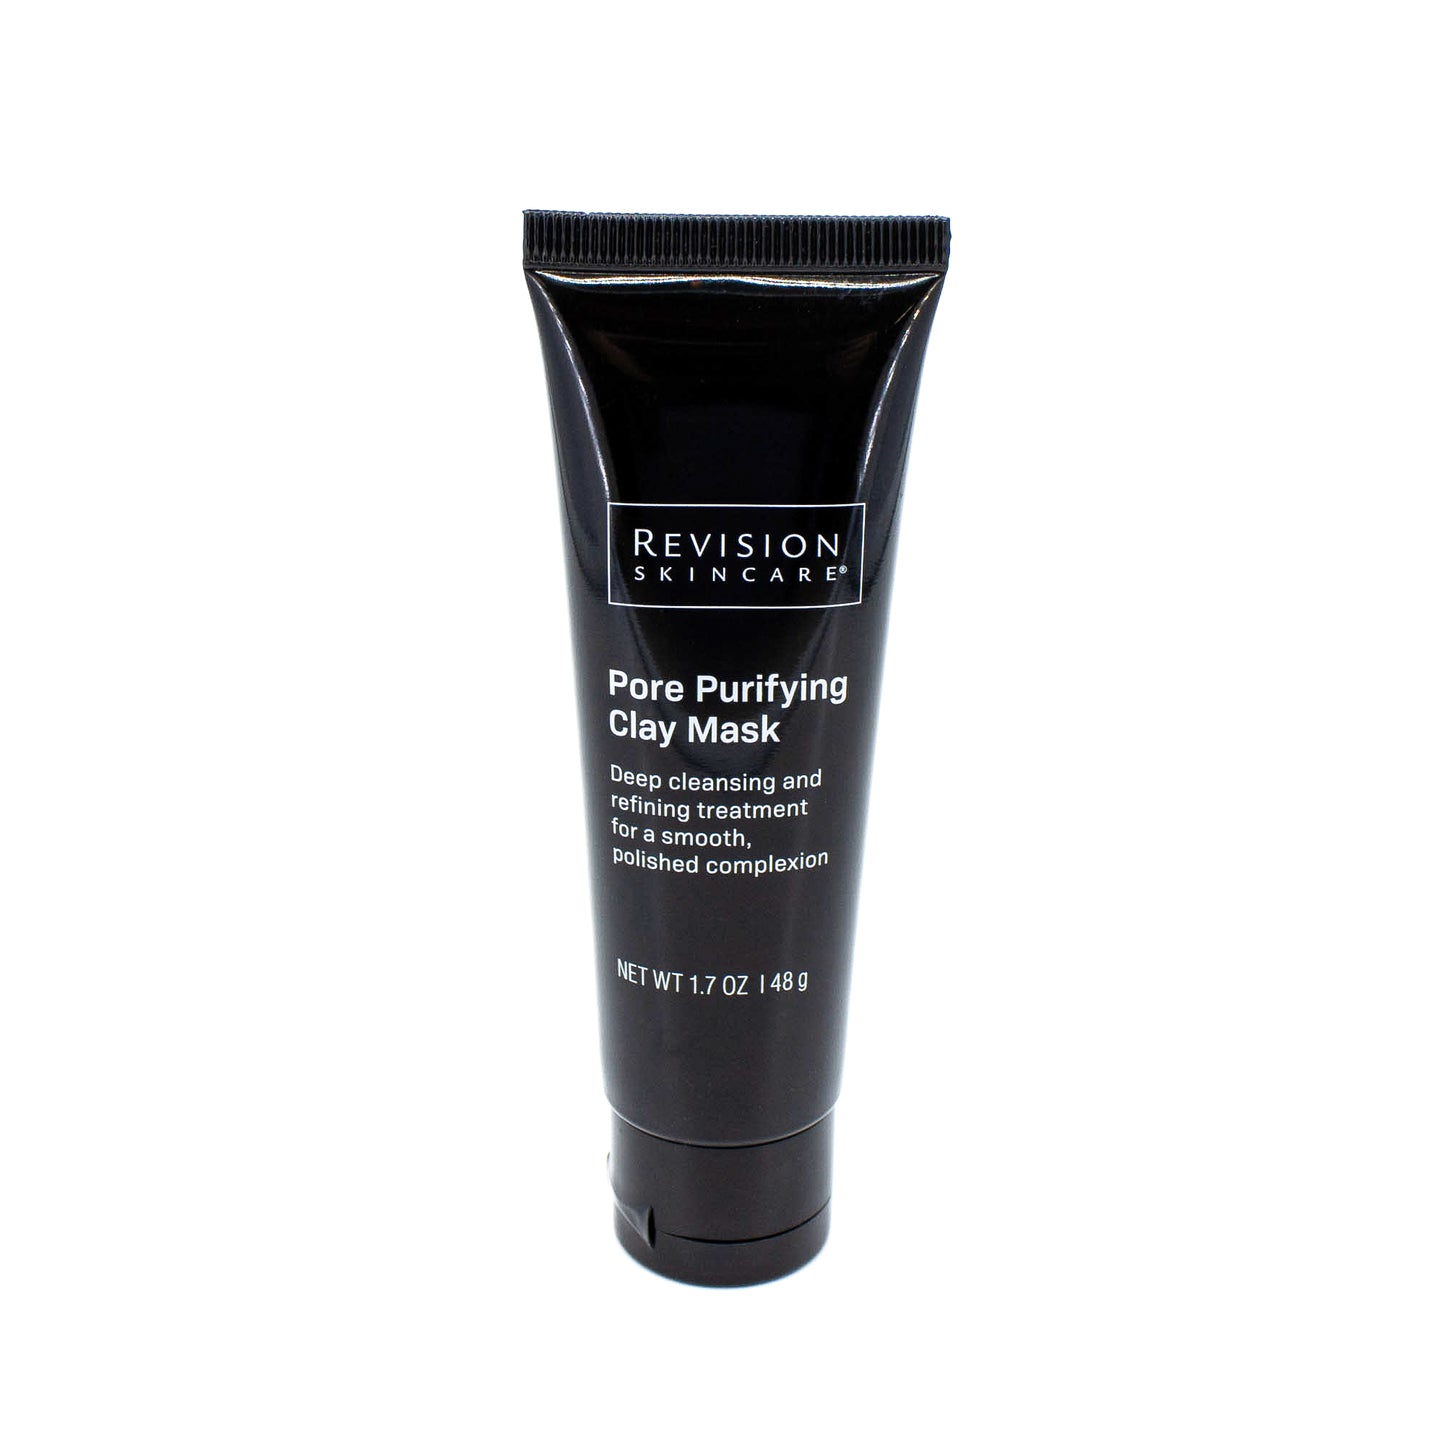 REVISION SKINCARE Pore Purifying Clay Mask 1.7oz - Imperfect Box